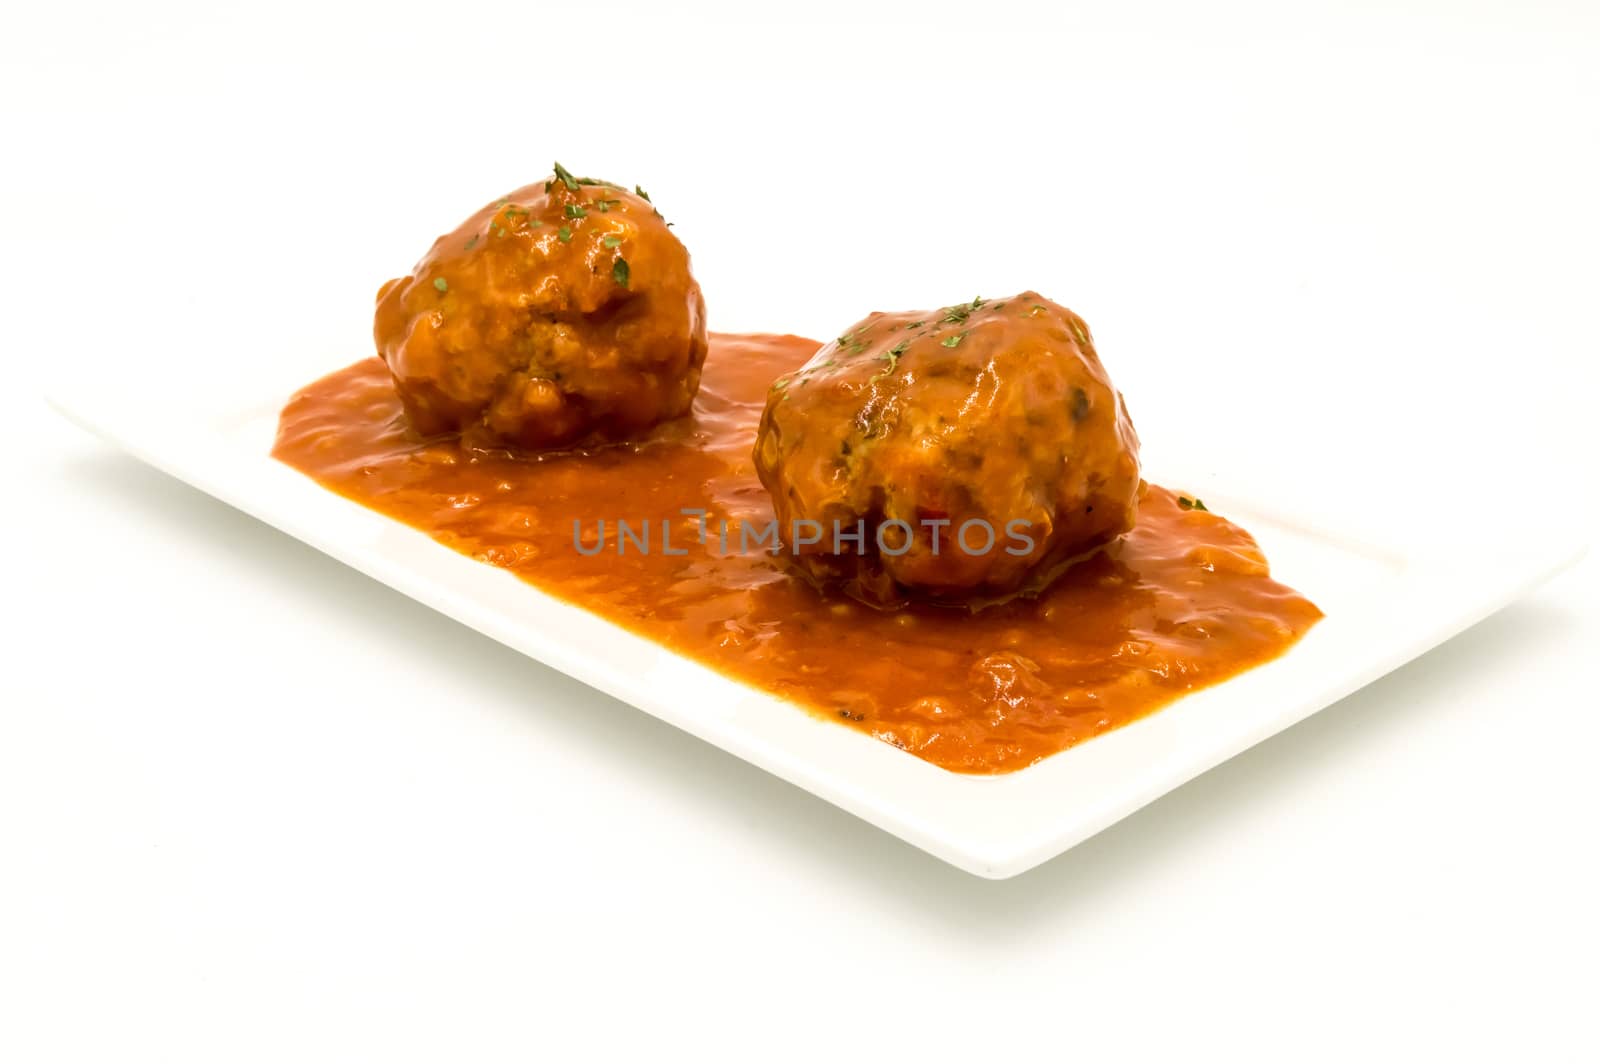 Meatballs cooked in tomato sauce on a white background